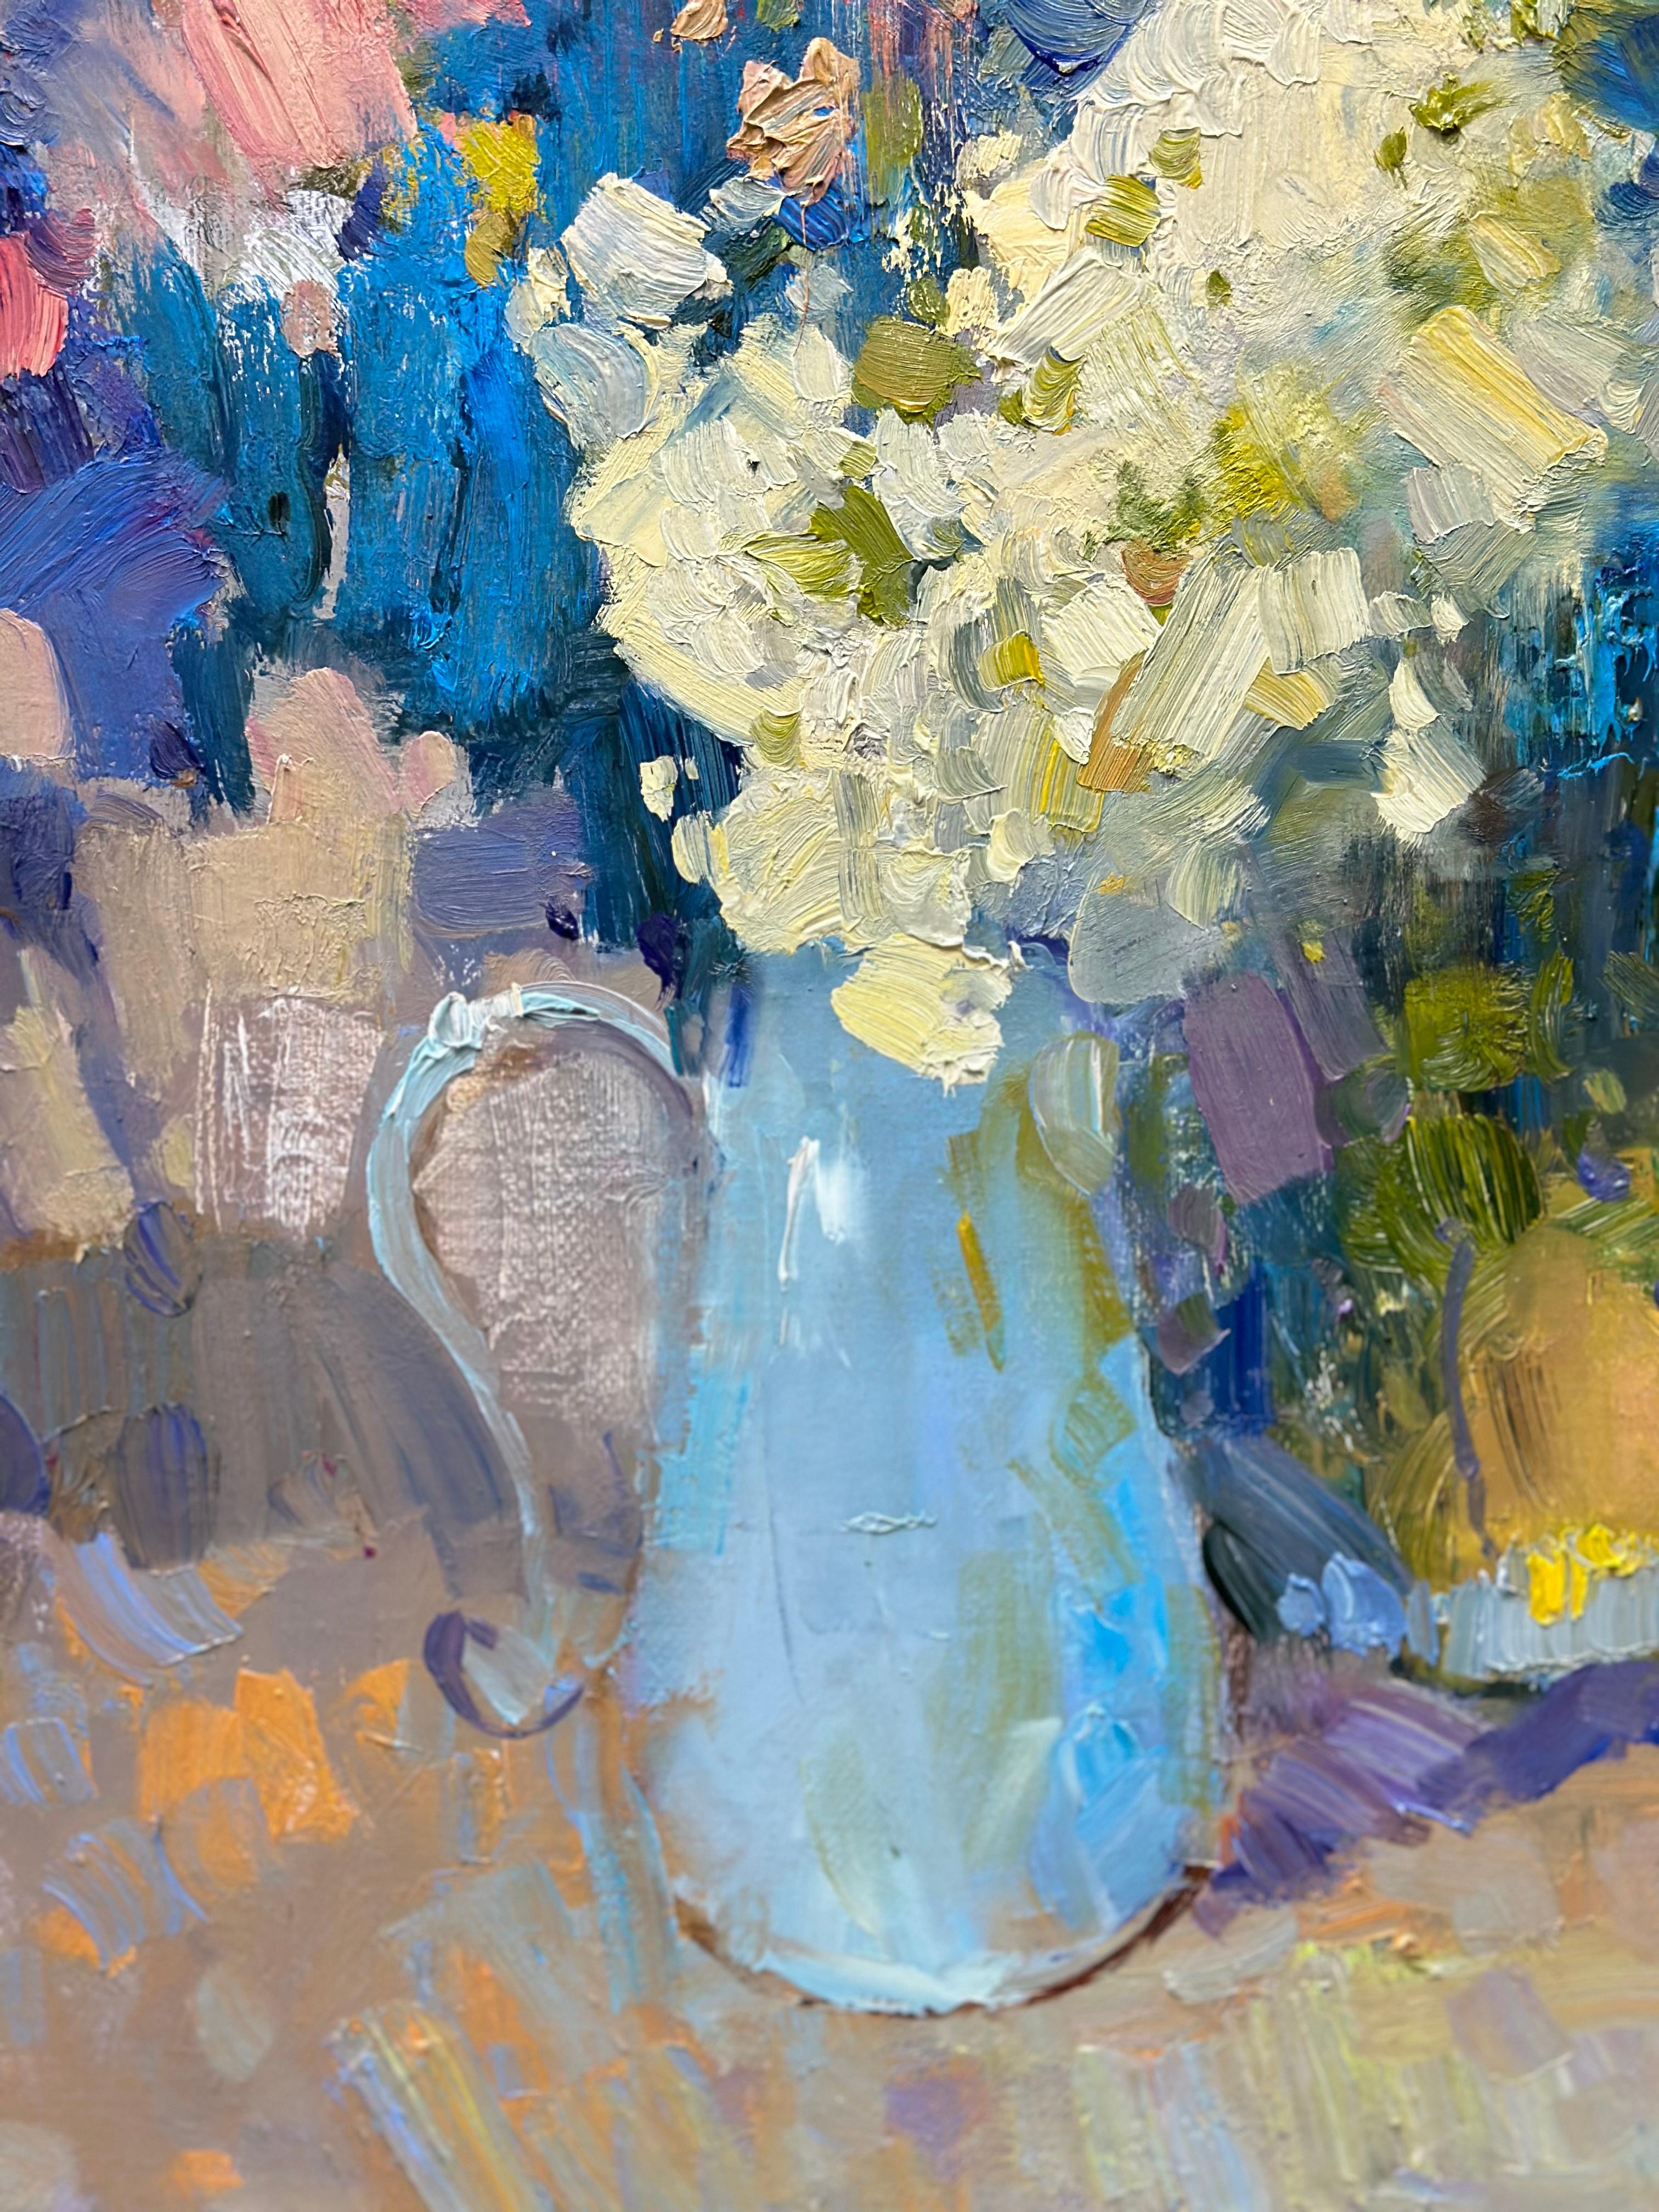 Summer Flowers - Impressionist Painting by Andrei Belaichuk